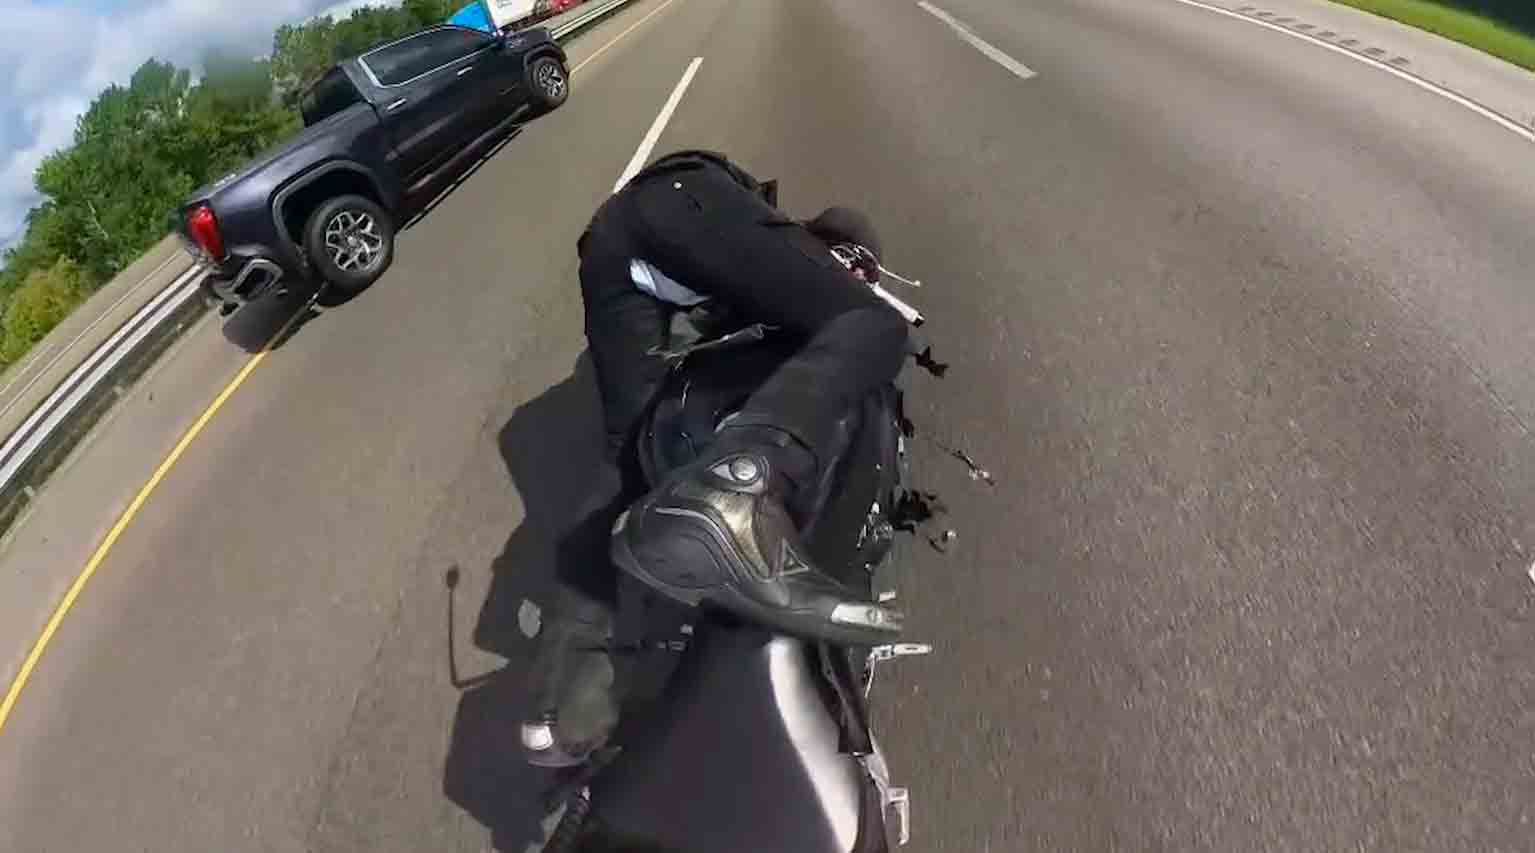 Video: Motorcyclist Learns a Lesson After a 140 km/h Accident Resulting in 20 Broken Bones